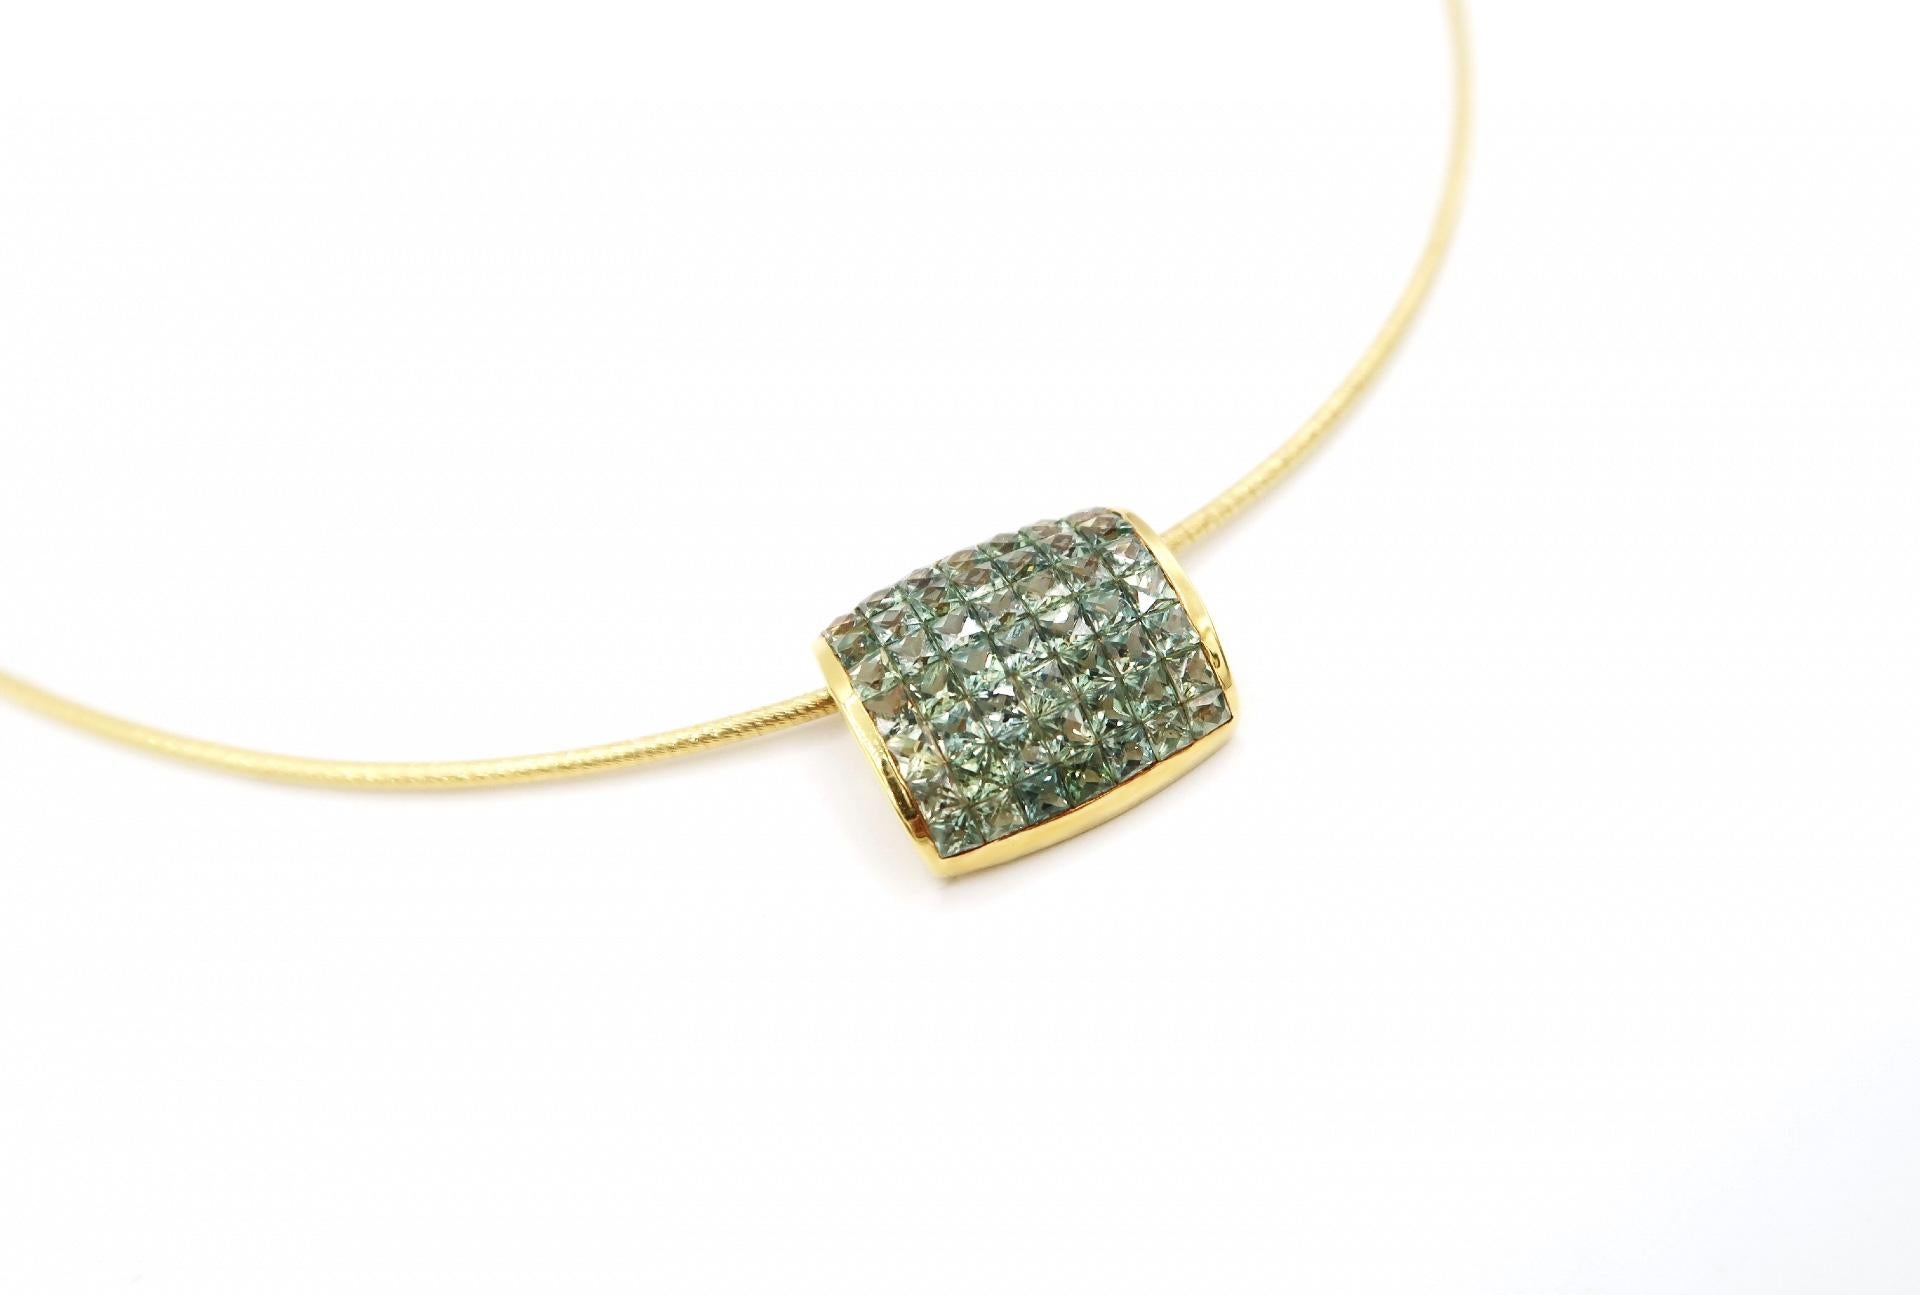 Invisible Set Princess Cut Green Sapphire Aerodynamic 18K Gold Pendant Necklace

Pendant
Gold: 18K Yellow Gold, 4.701 g
Green Sapphire: Princess, 10.40 ct

Necklace
Gold: 18K Yellow Gold, 7.78 g
Length: 16 inches